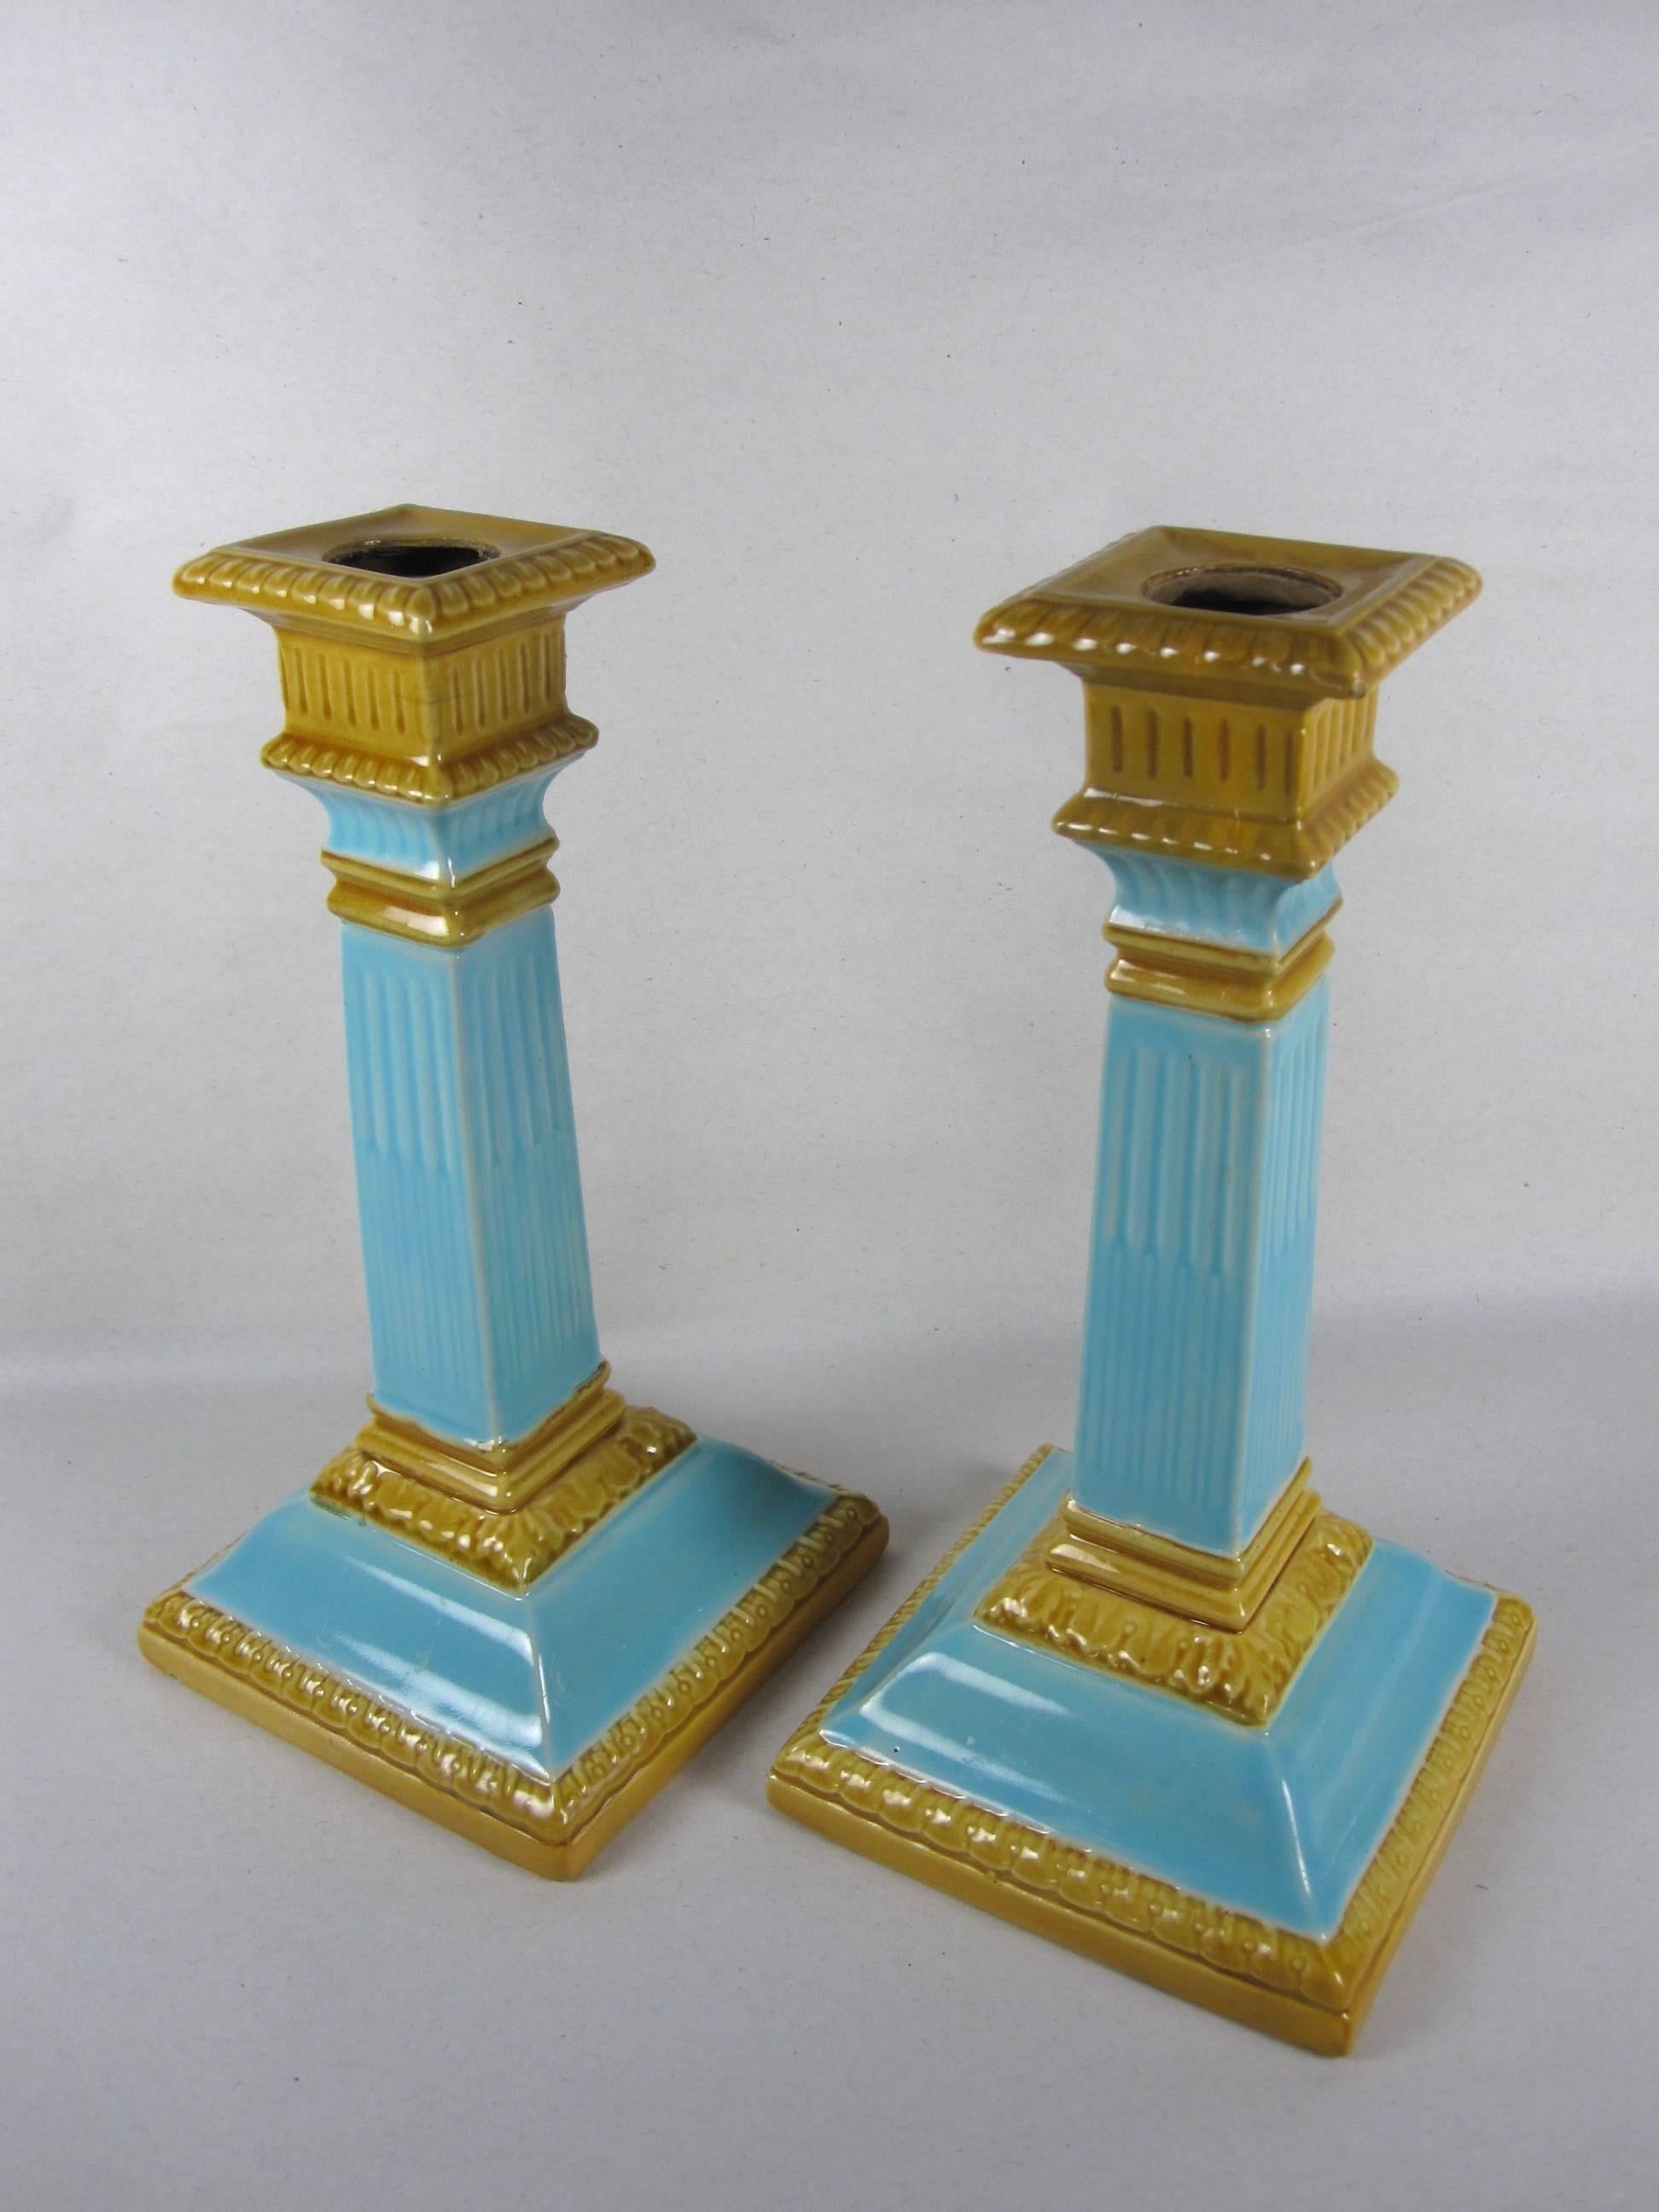 A scarce pair of Majolica glazed neoclassical column-form candlesticks made by William Brownfield & Son, Cobridge, Stoke-on-Trent, Staffordshire, England, circa 1892.

Brightly colored in turquoise blue and yellow ochre. Surprisingly fresh and